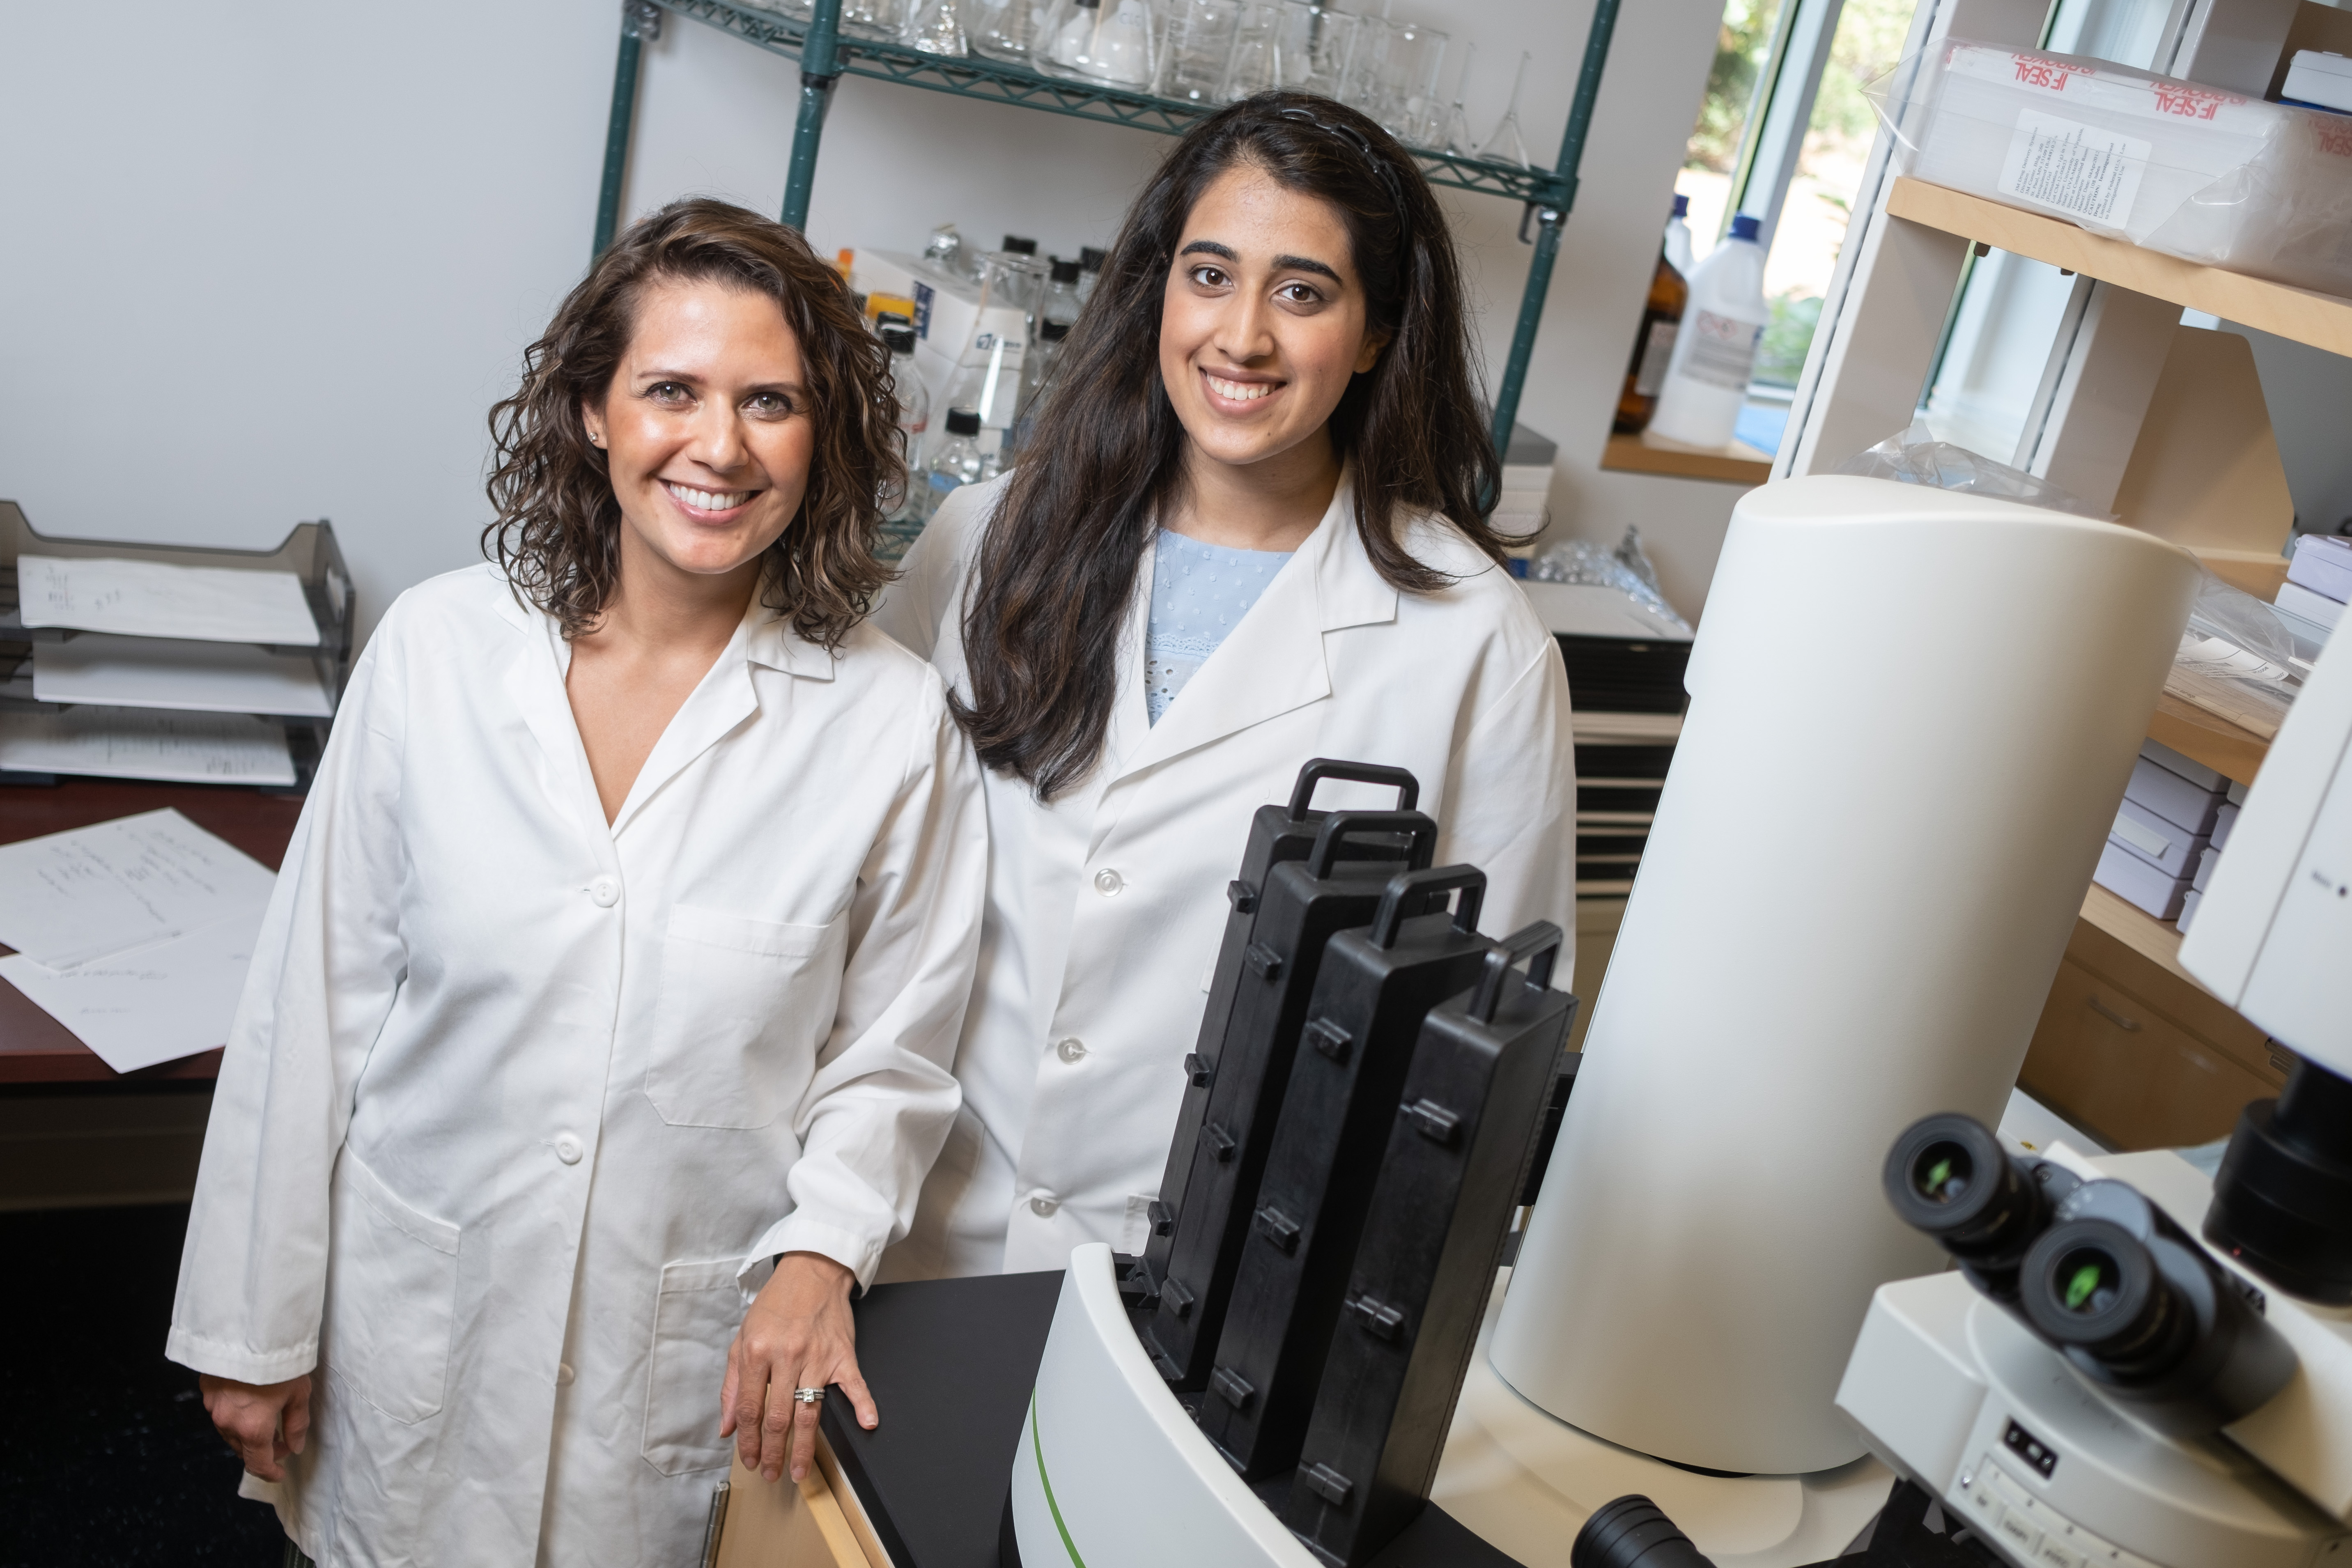 Illena Mauldin (left) stands with undergrad researcher in the lab